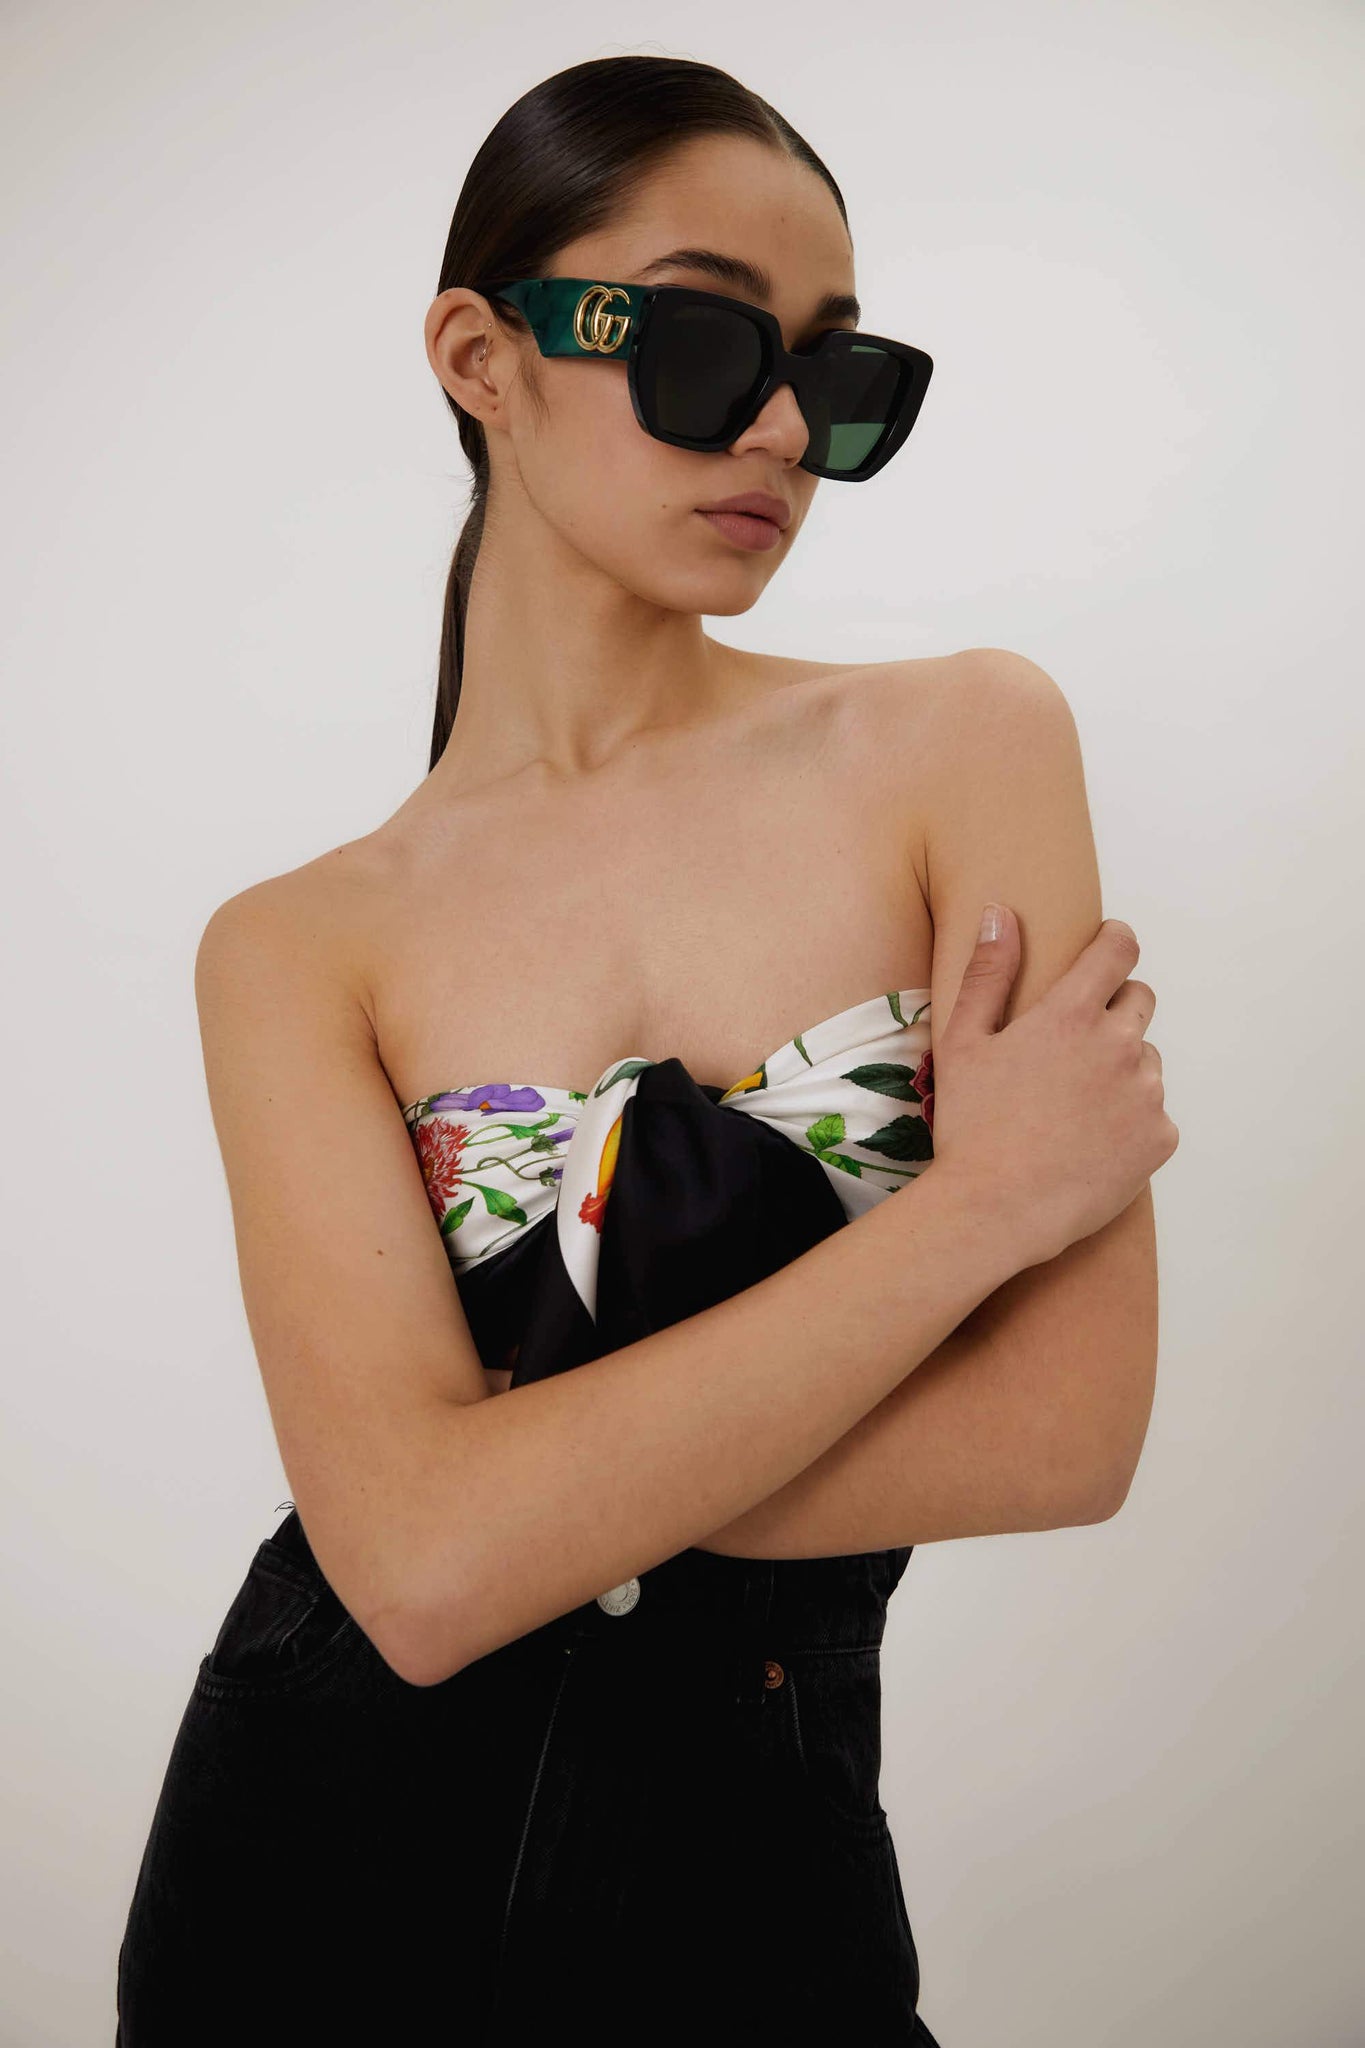 Gucci GG0956S oversized black and green sunglasses with maxi logo